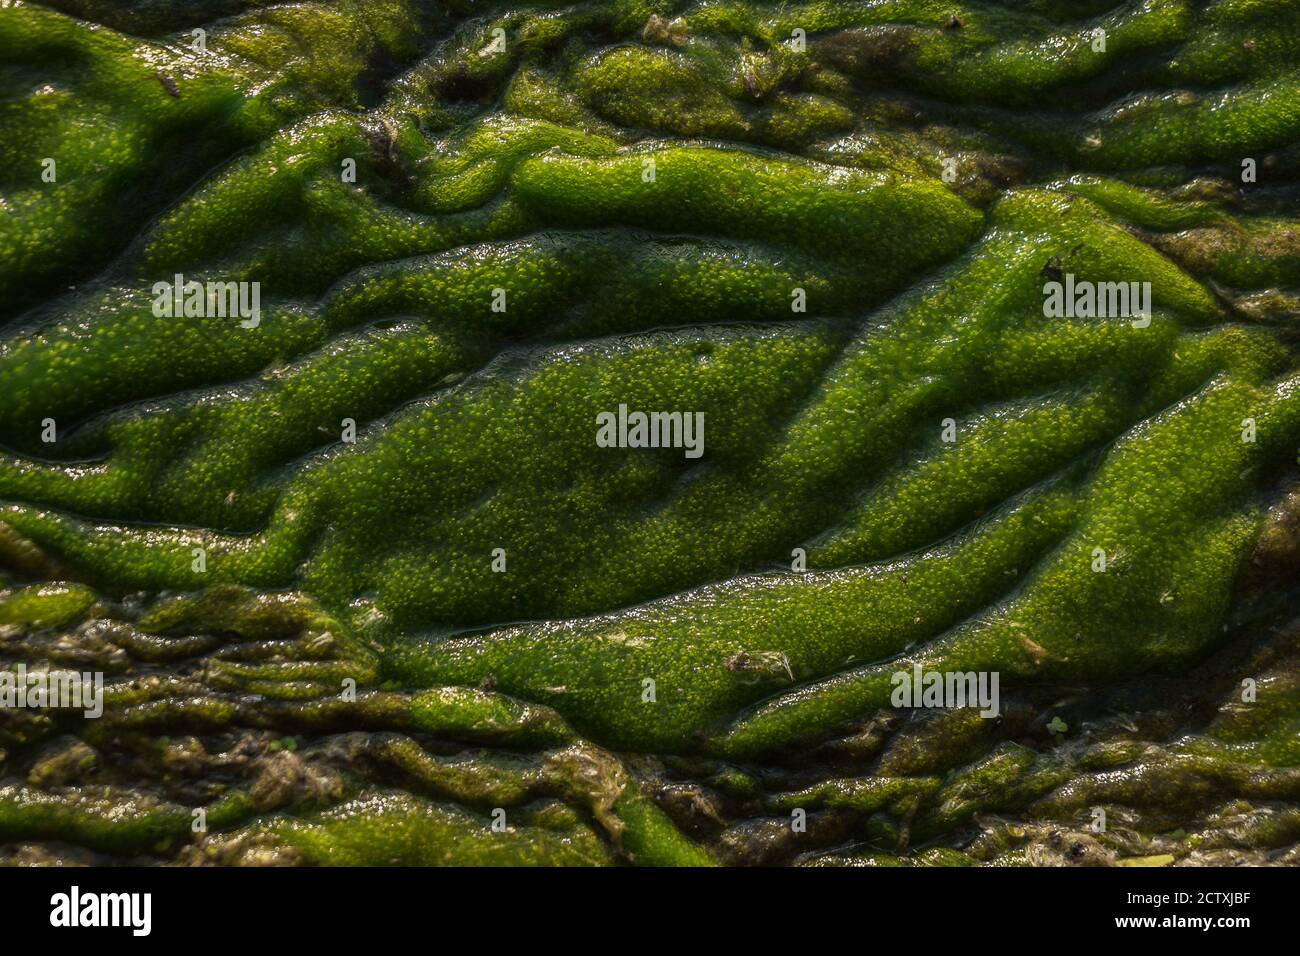 Green swampy abstract texture. View of algae and swamp close up. Abstract horizontal background. Stock Photo